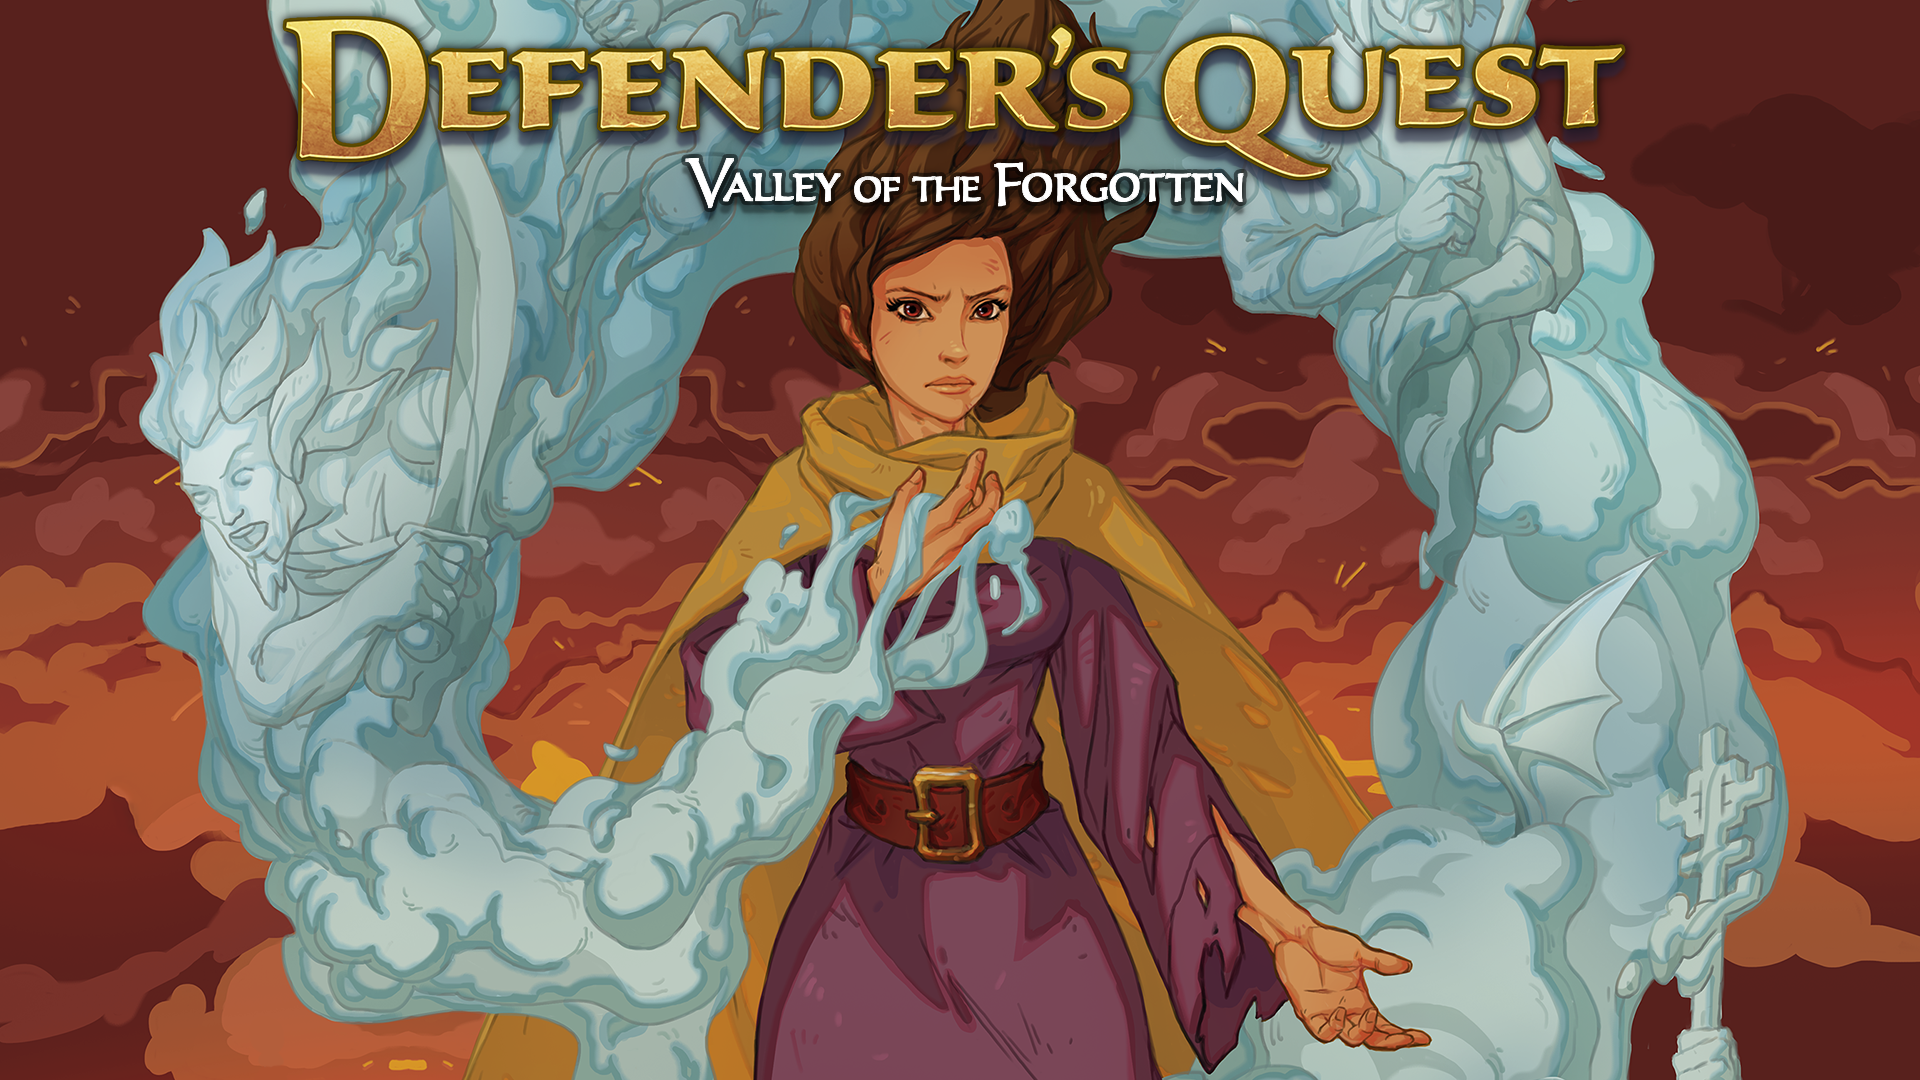 Defender's Quest is coming to PlayStation and Xbox in February 2018